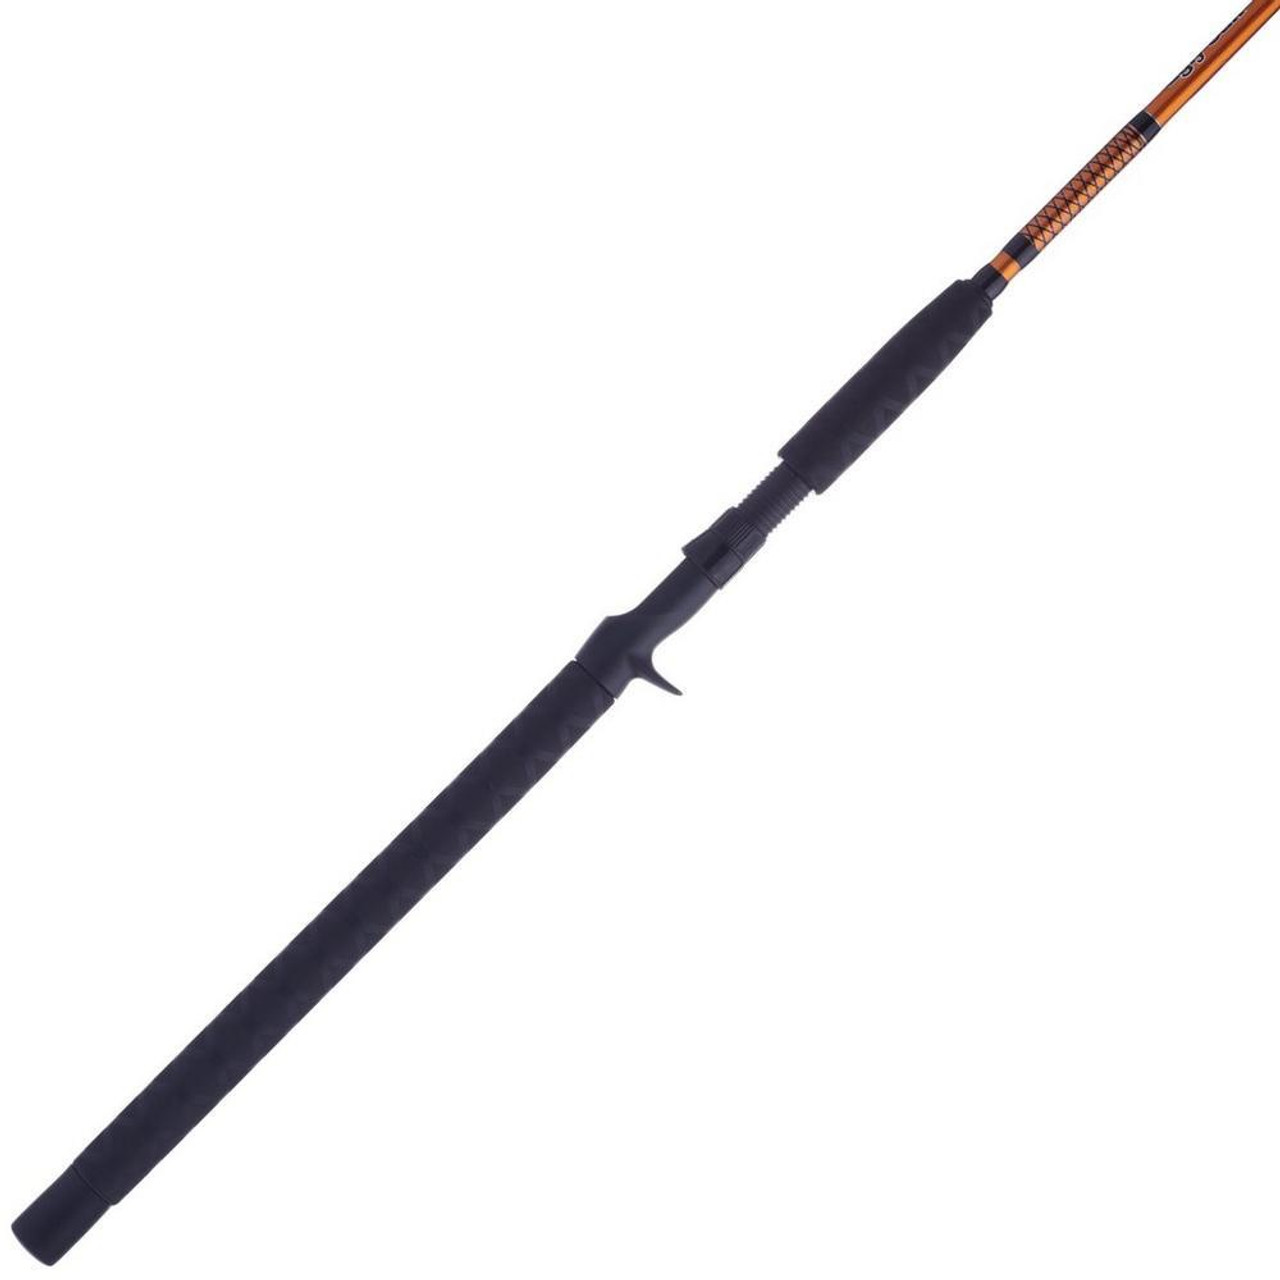 https://cdn11.bigcommerce.com/s-70mih4s/images/stencil/1280x1280/products/20681/53623/Shakespeare-Ugly-Stik-Catfish-Special-Casting-Rod-8-Medium-Heavy-043388468024_image2__77163.1620727702.jpg?c=2